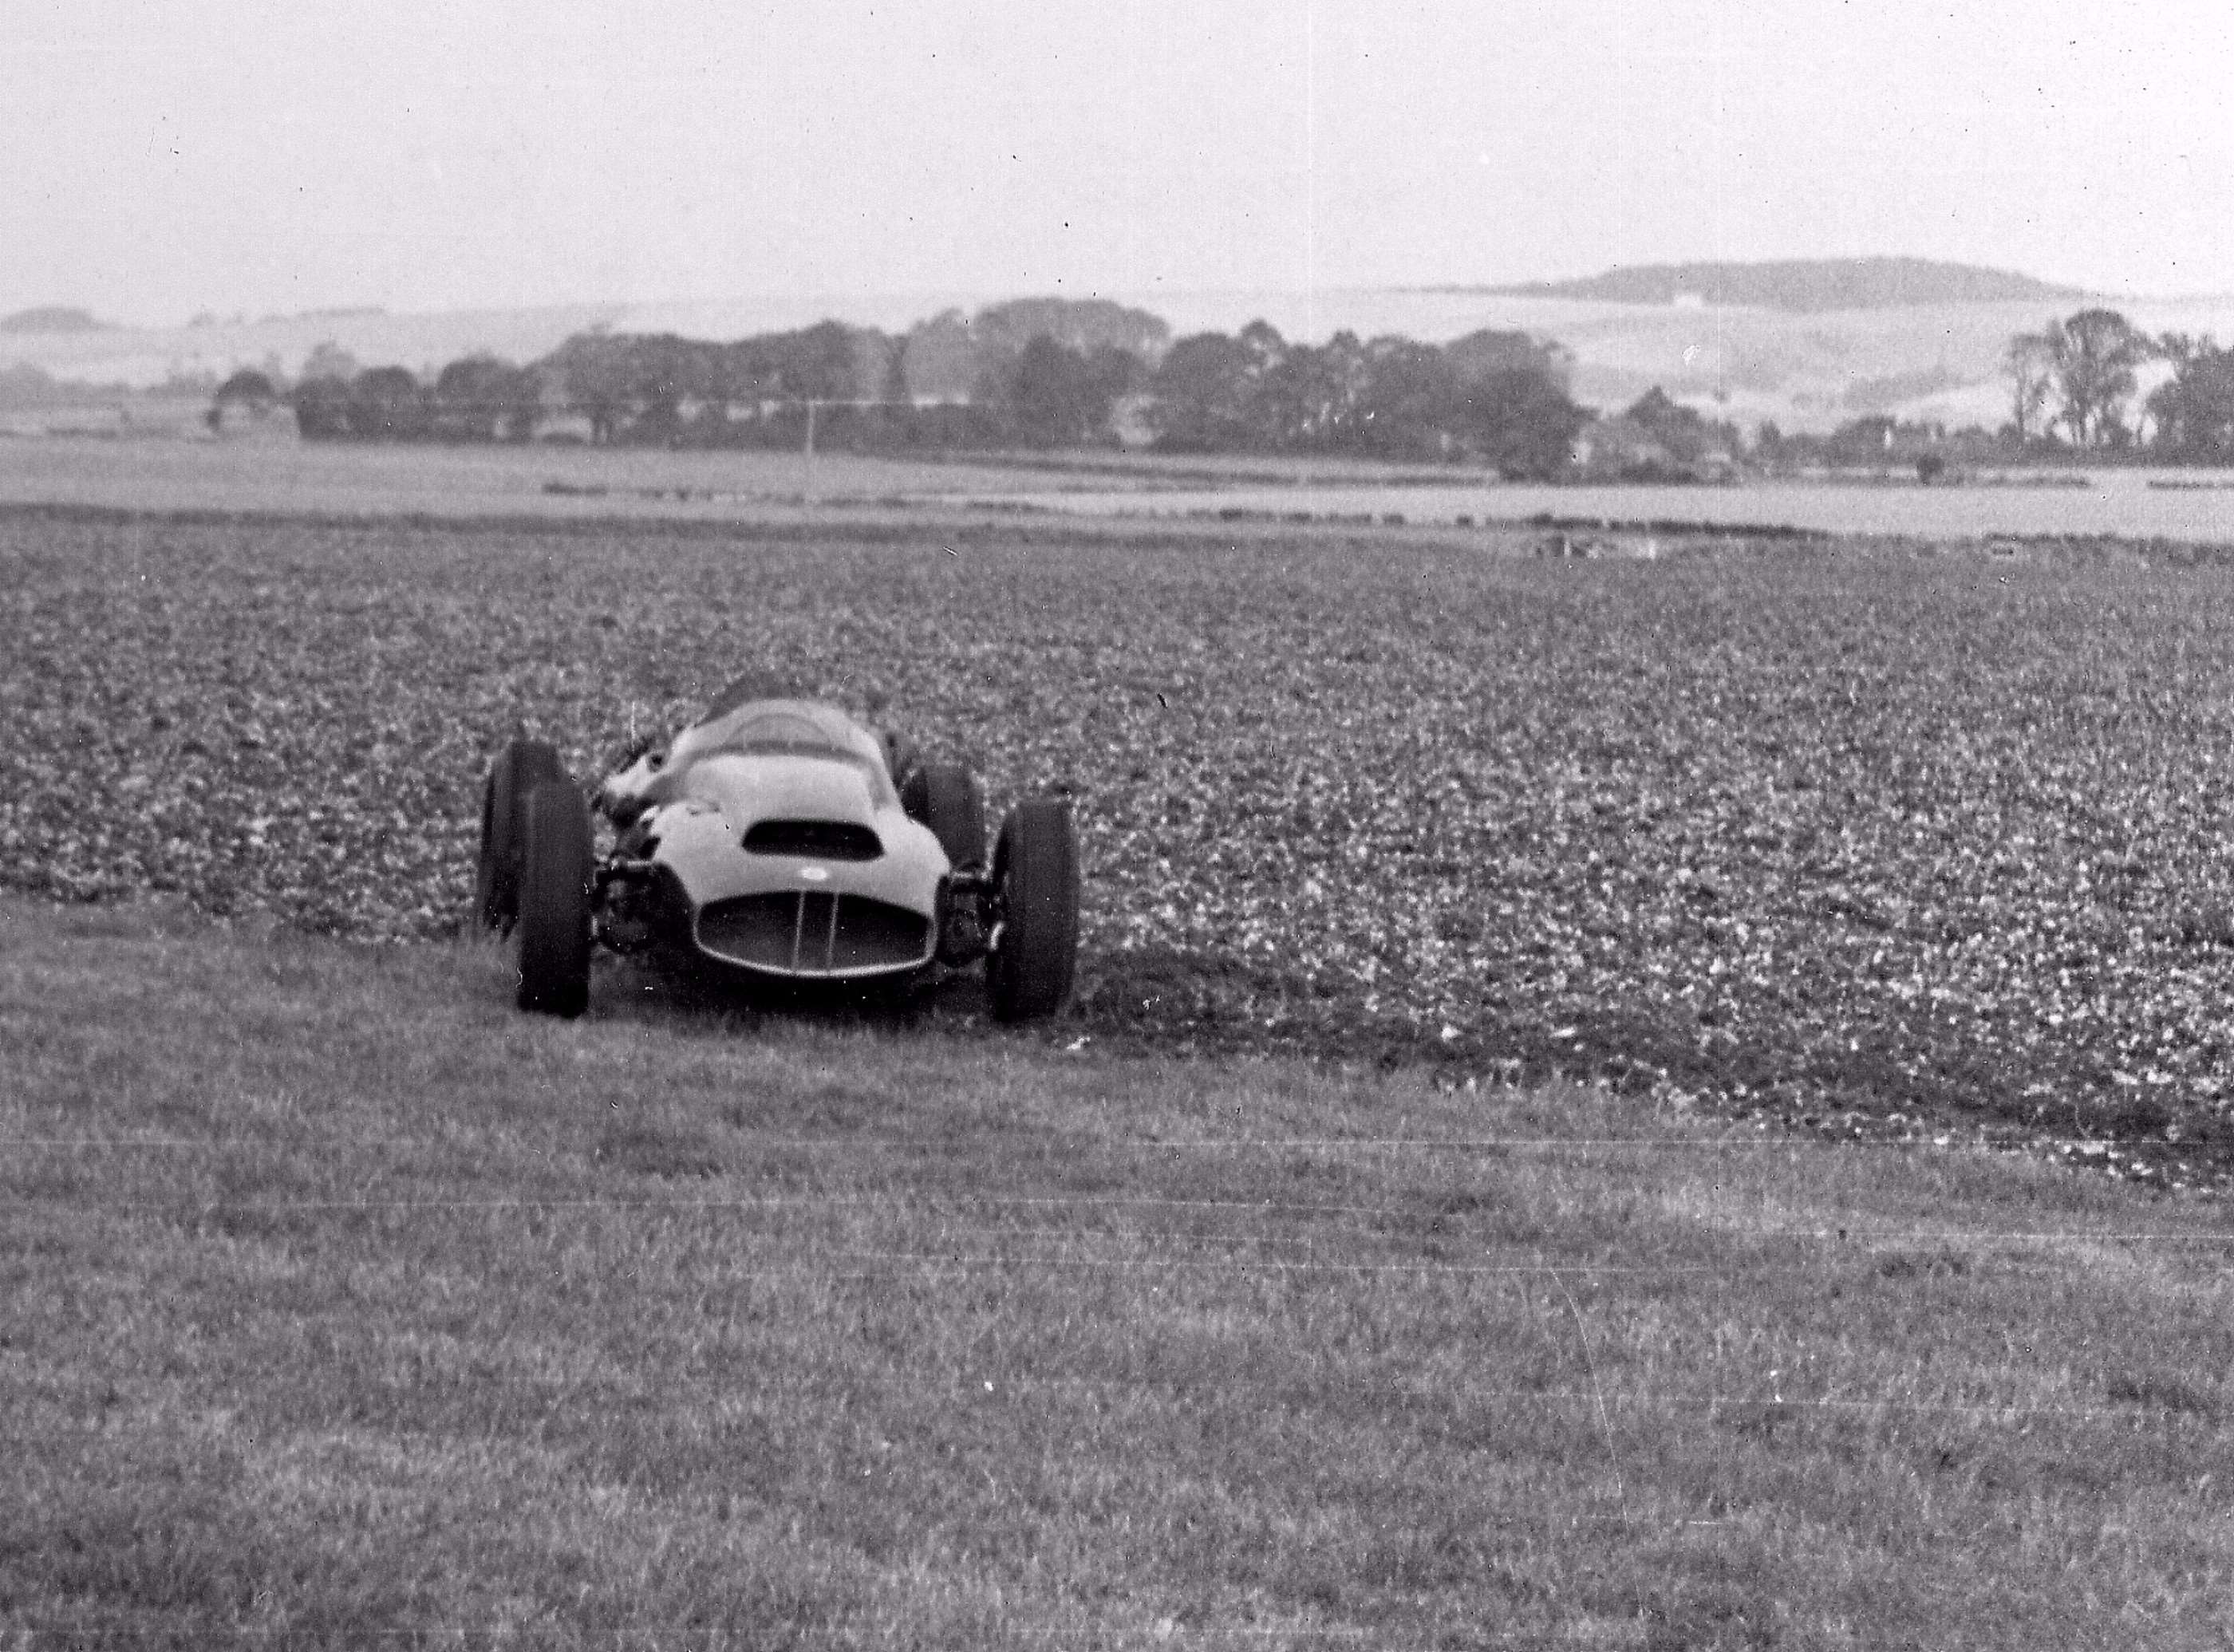 Even rarer snapshot of the BRM prototype after Jack Brabham spun off the circuit in it between St Mary’s and Lavant...